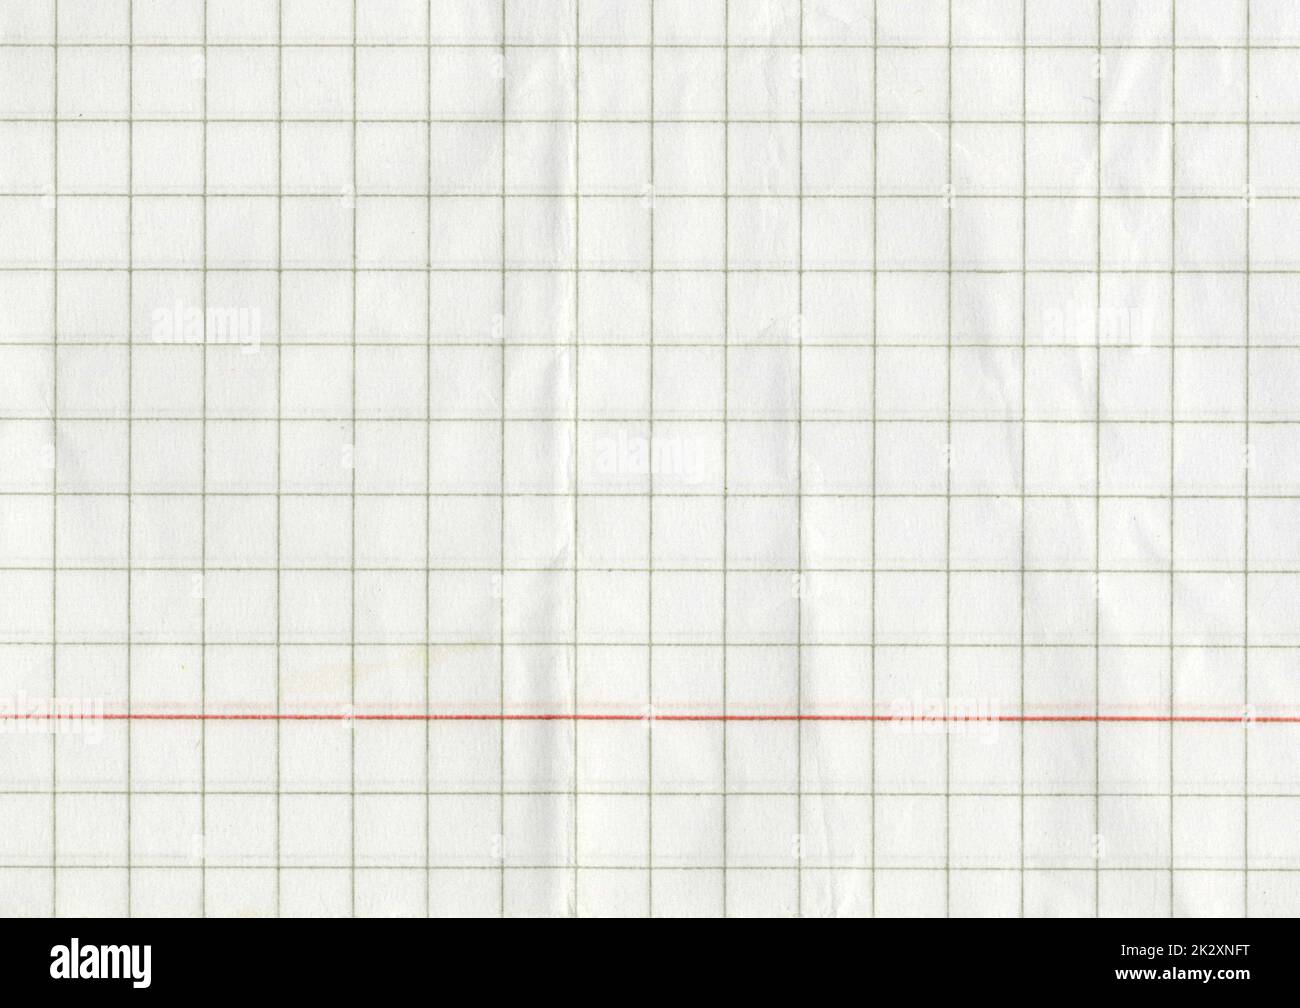 High resolution large image of a white uncoated checkered graph paper scan wrinkled weathered thin textbook paper with one red line and gray checkers copy space for text for presentation high quality wallpaper Stock Photo